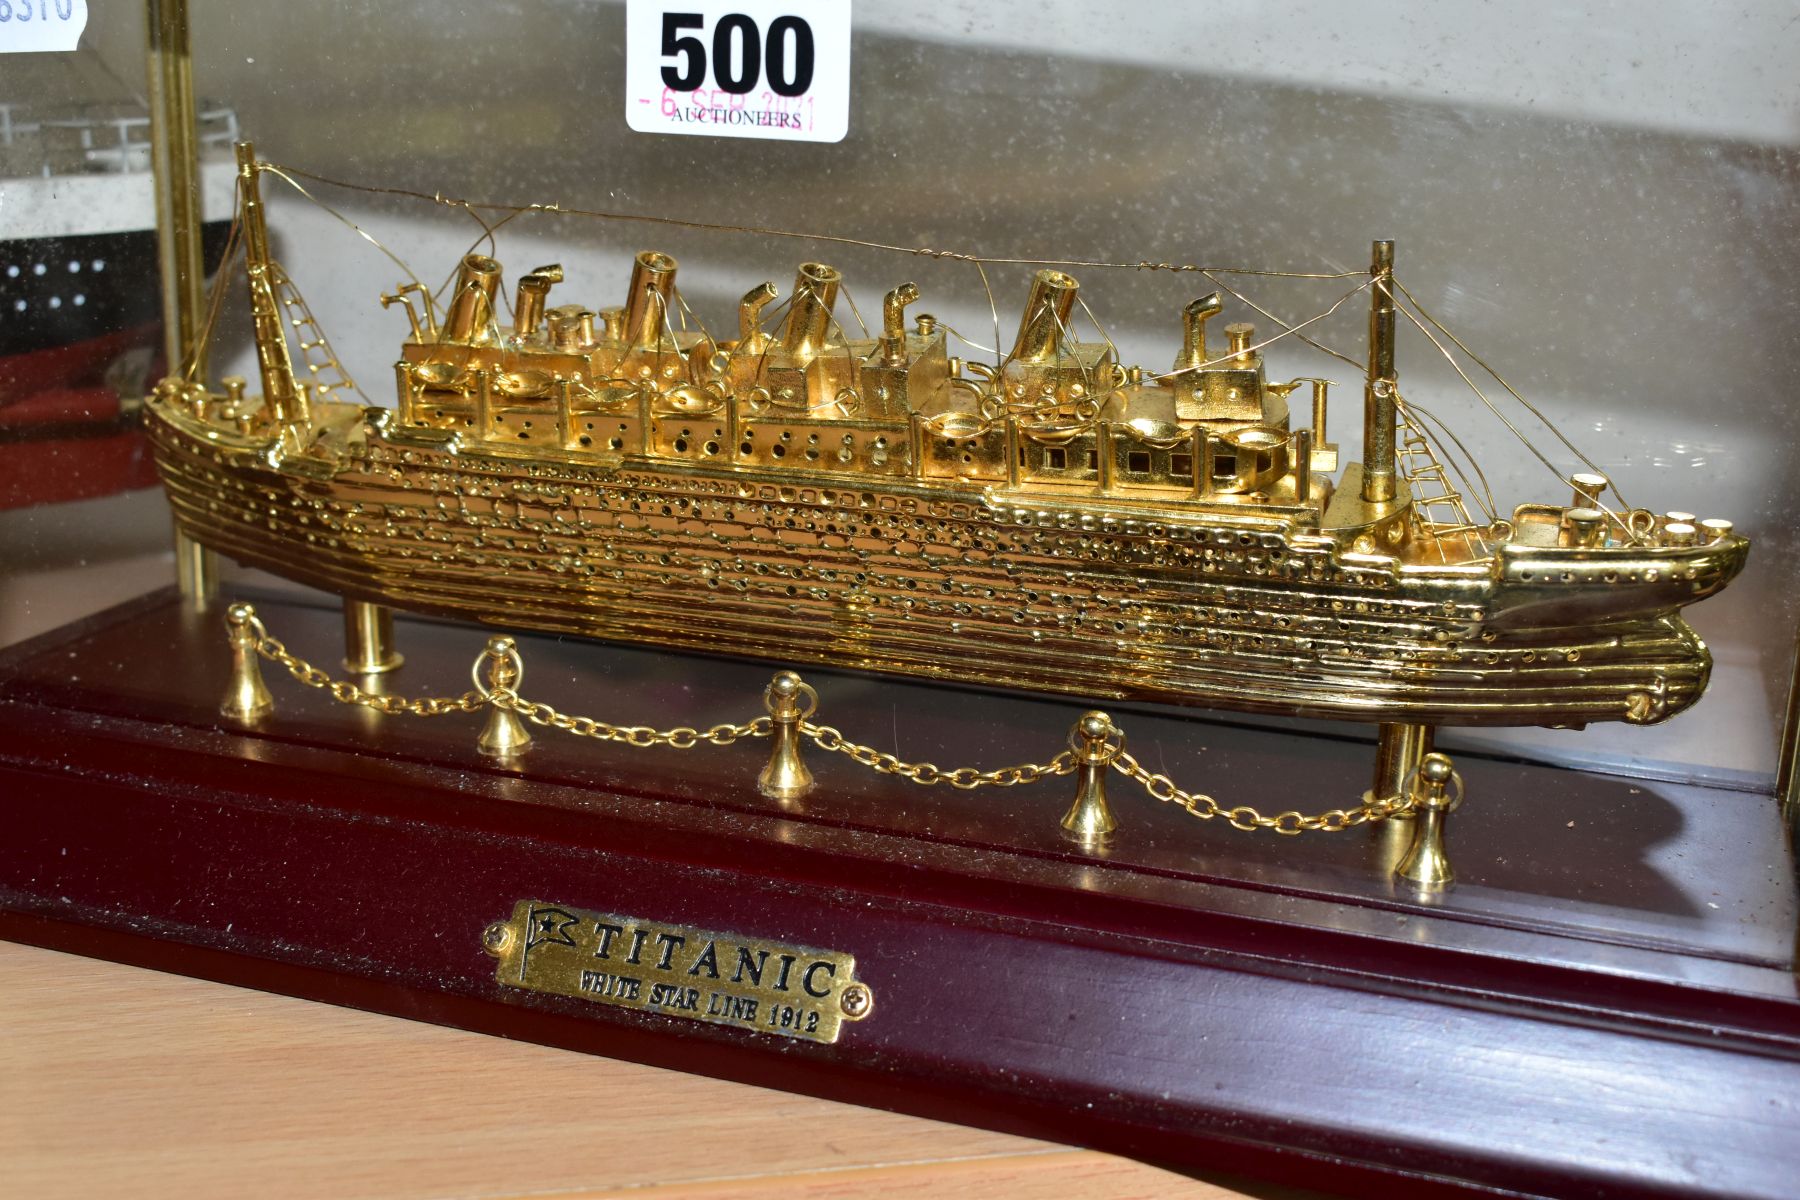 TWO MODERN MODELS OF THE TITANIC, once in glass case, 35.5cm x 17cm x 12.5cm including case, ship is - Image 3 of 5